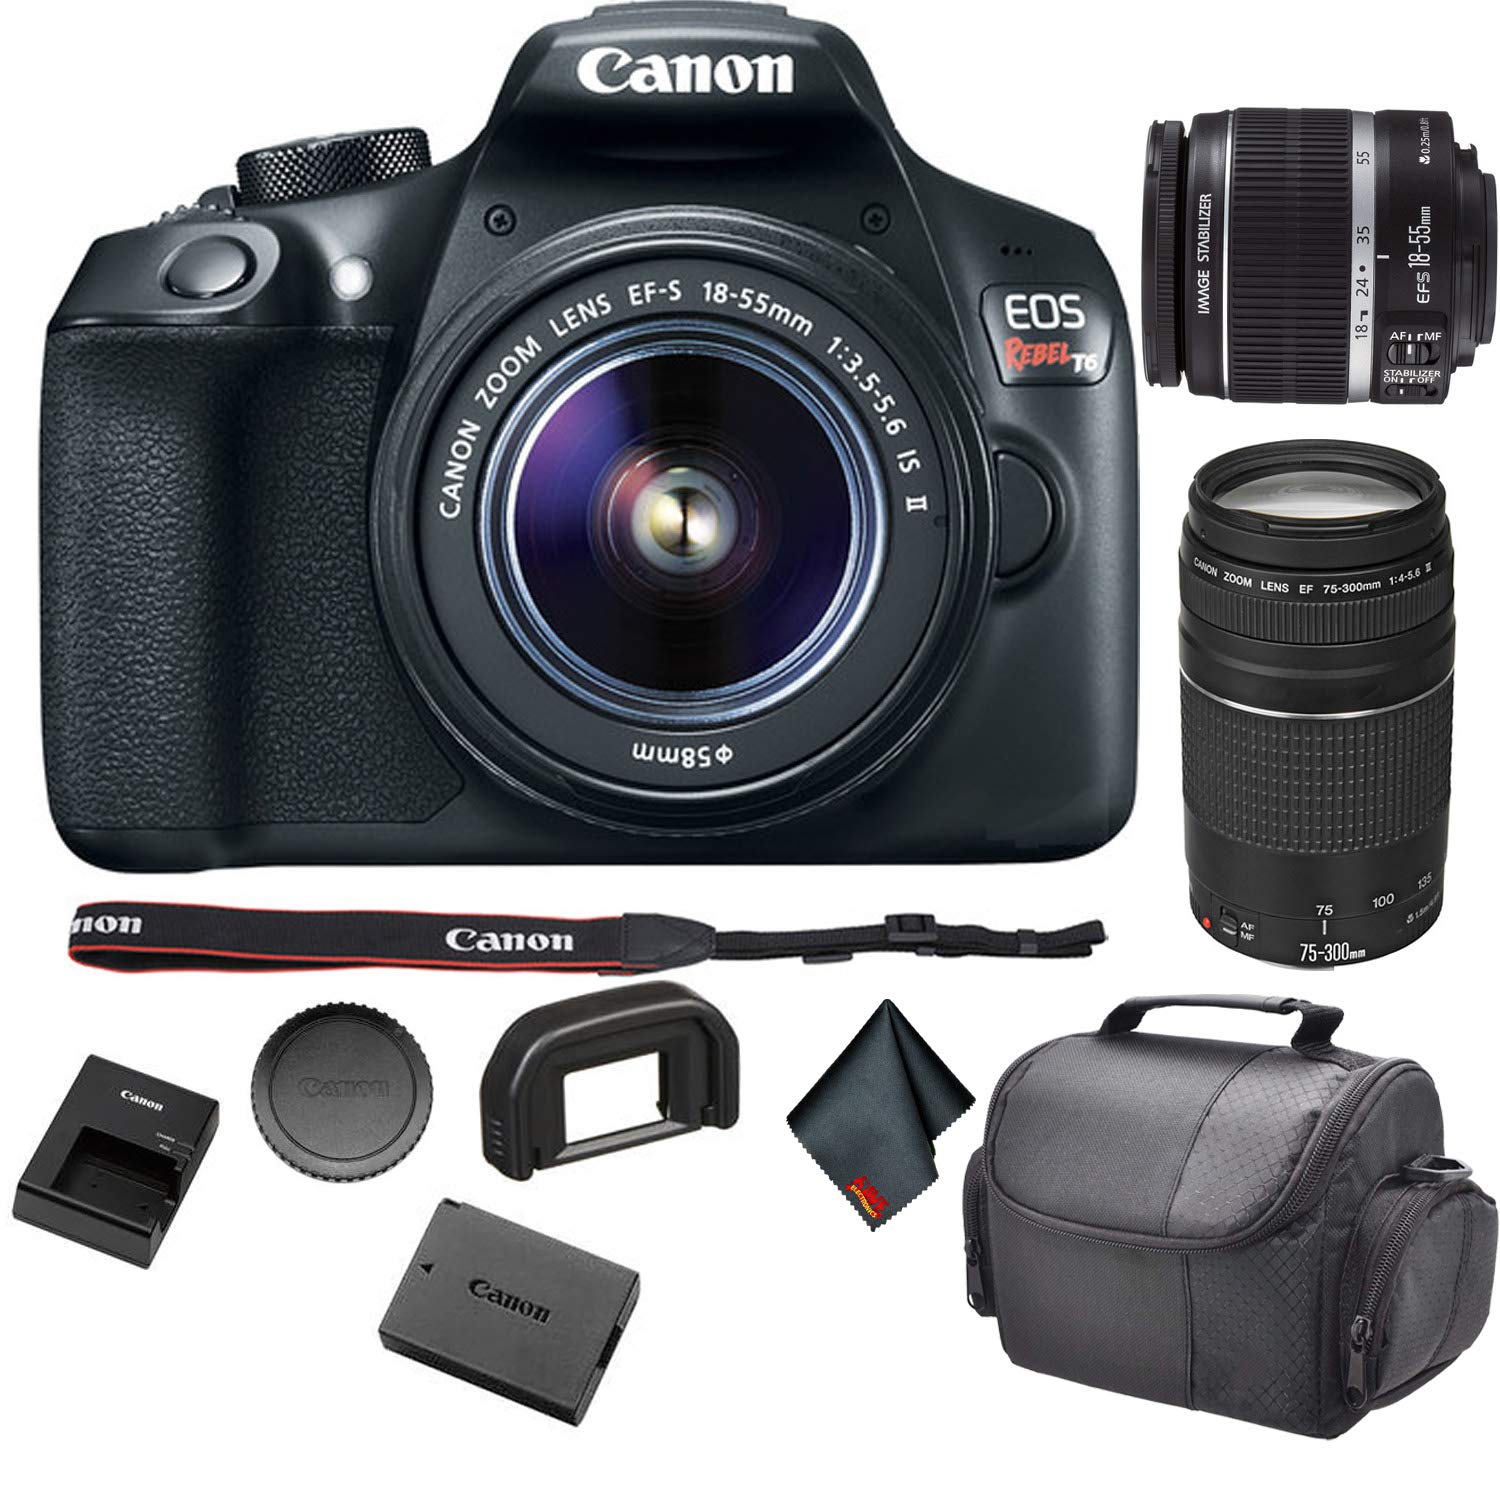 Canon EOS Rebel T6 DSLR Camera with 18-55mm Lens 1159C003 Bundle with Canon EF 75-300mm f/4-5.6 III Lens + More